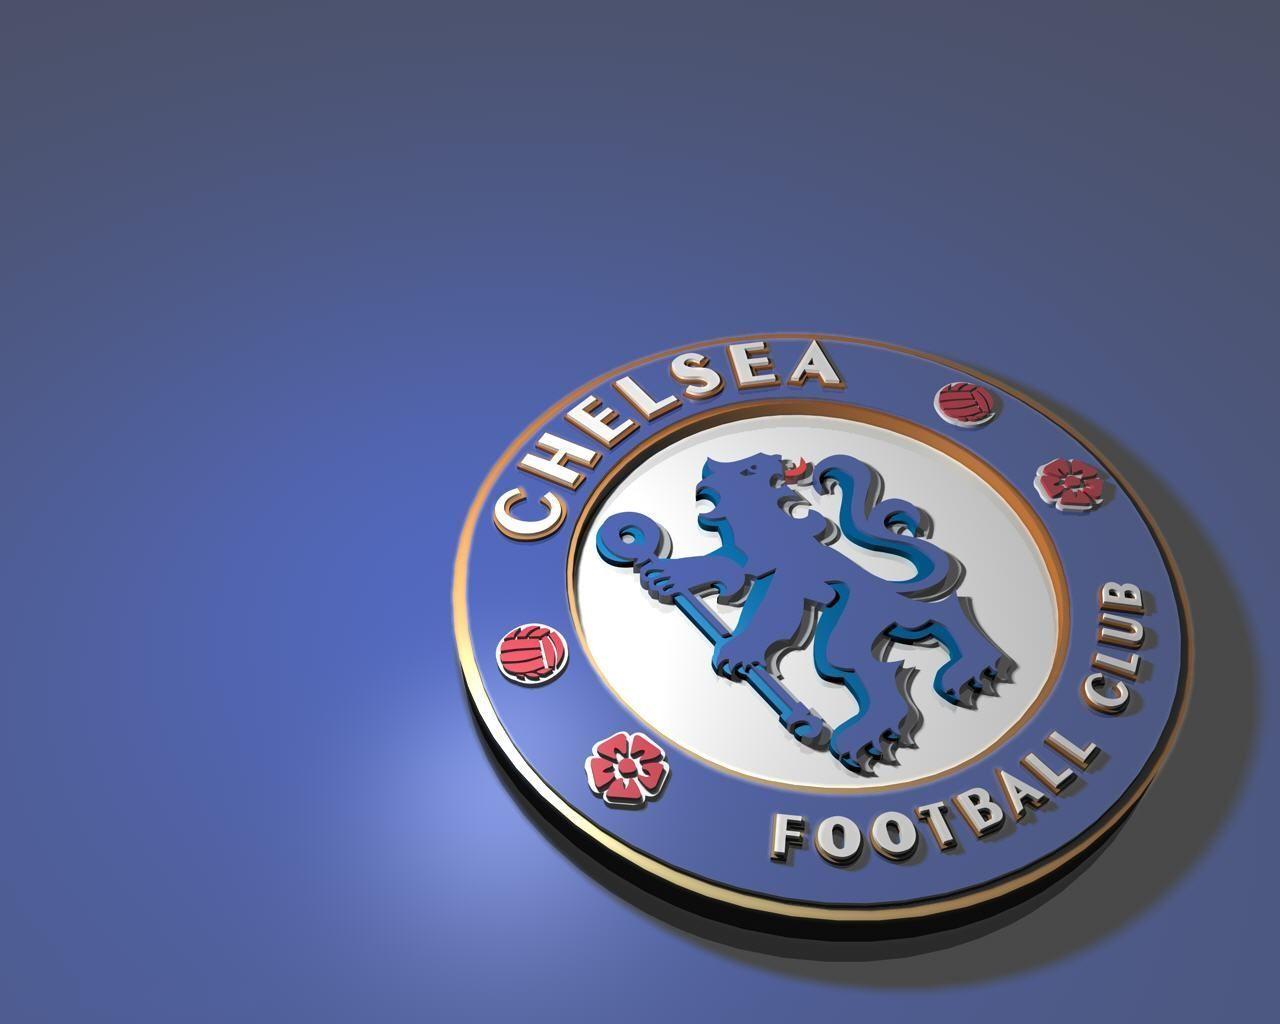 Chelsea FC Background